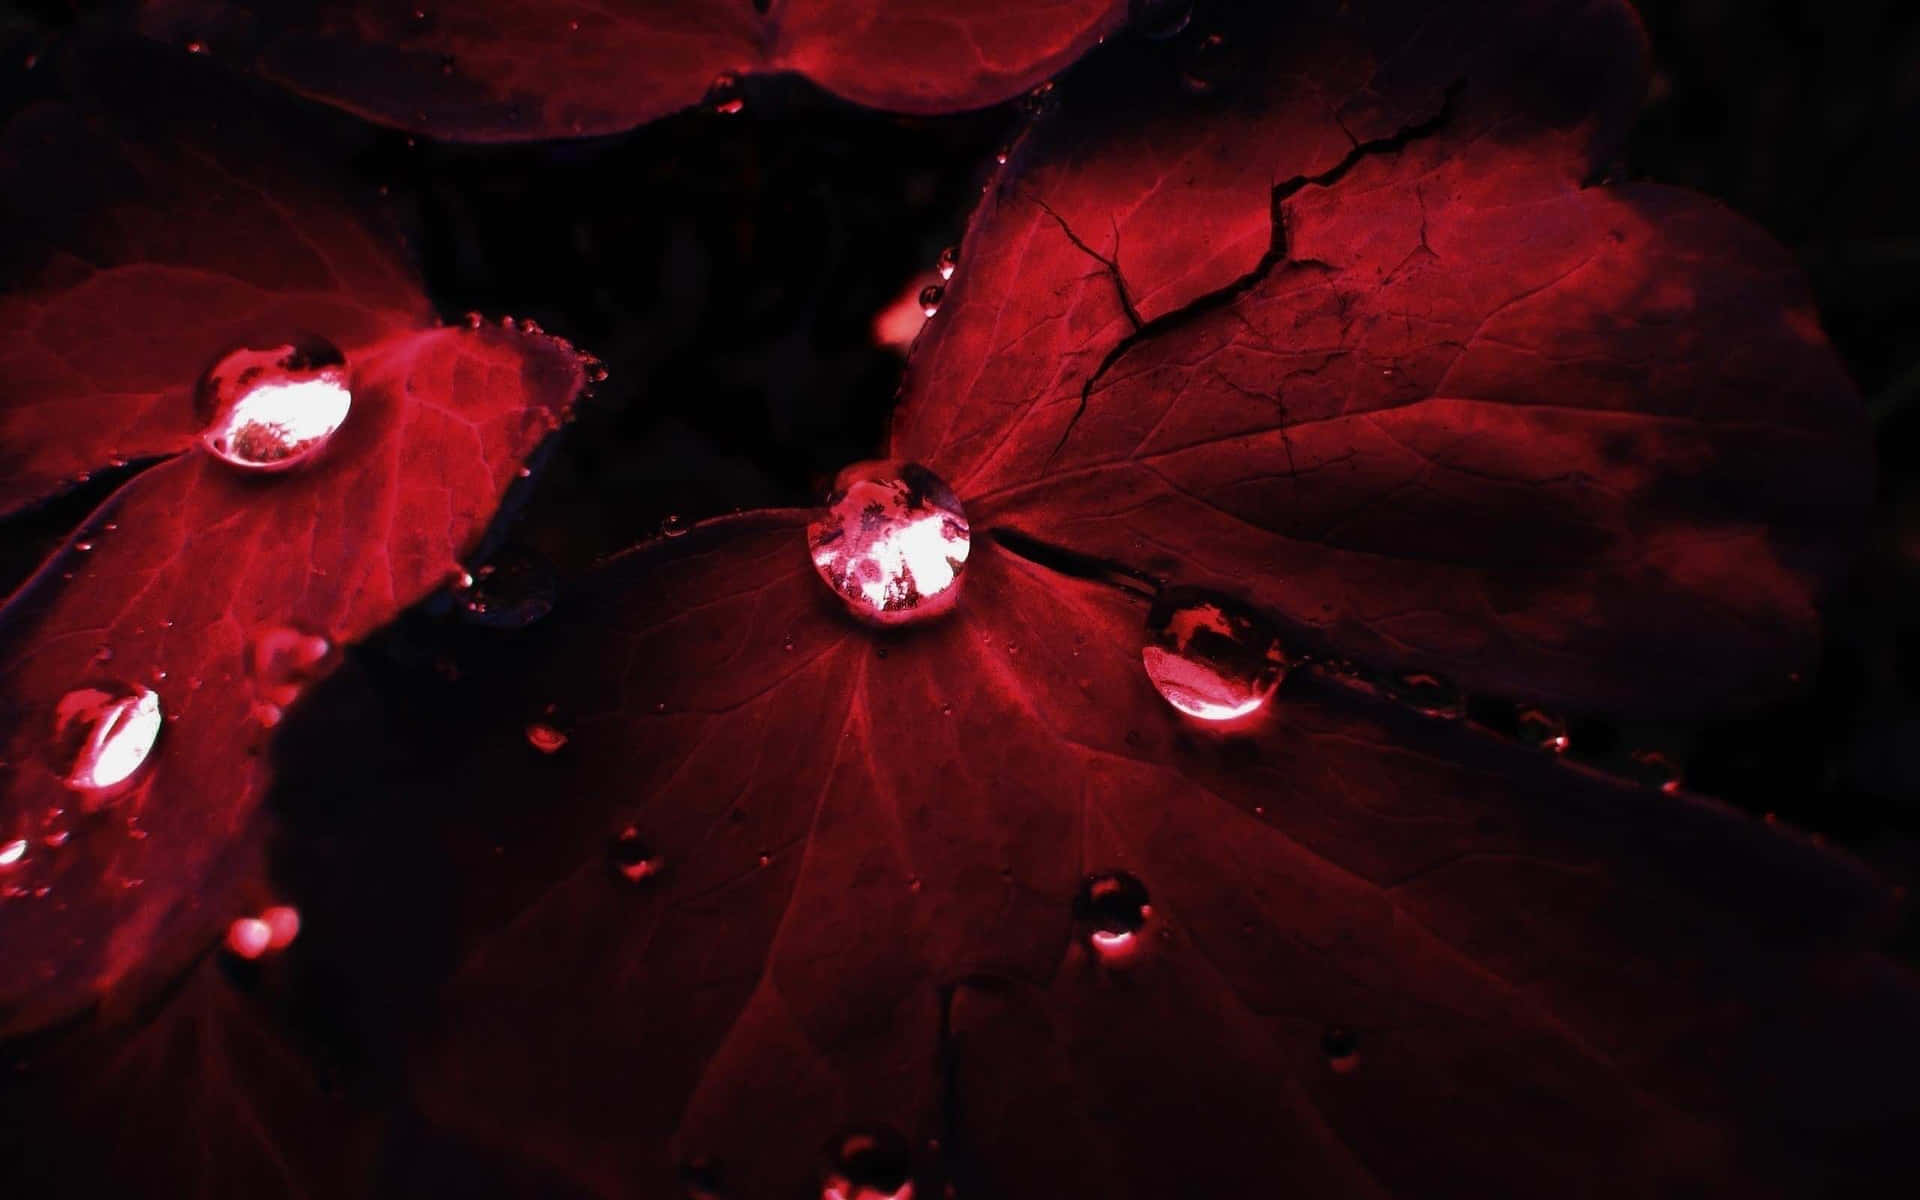 Red Leaves With Water Droplets On Them Wallpaper